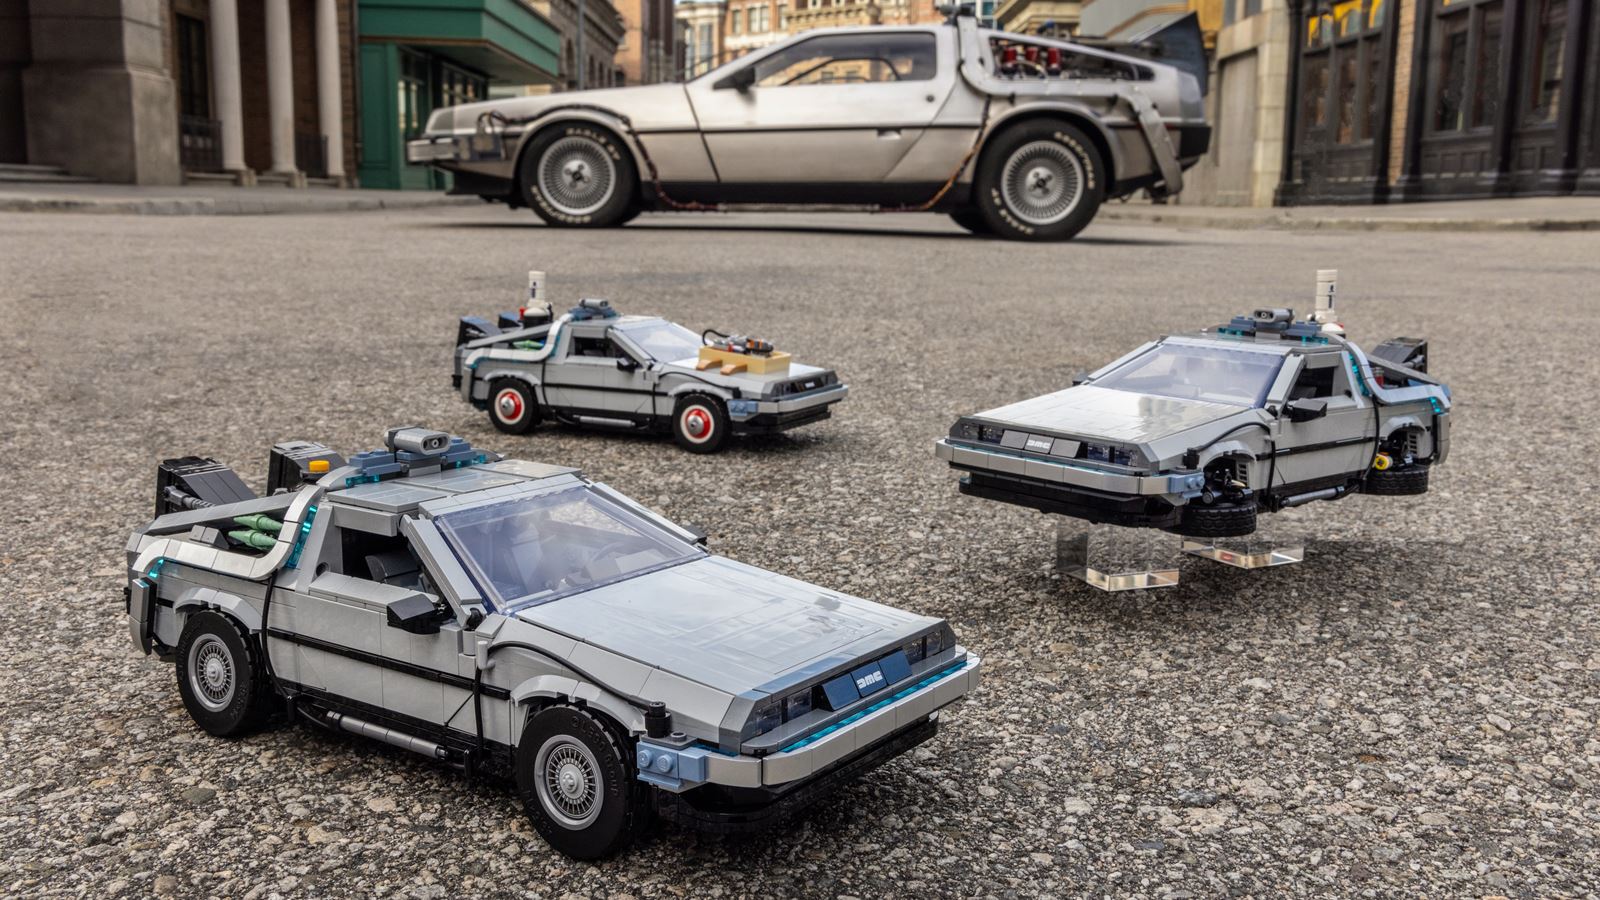 LEGO DeLorean DMC-12, price of the set, details and pieces